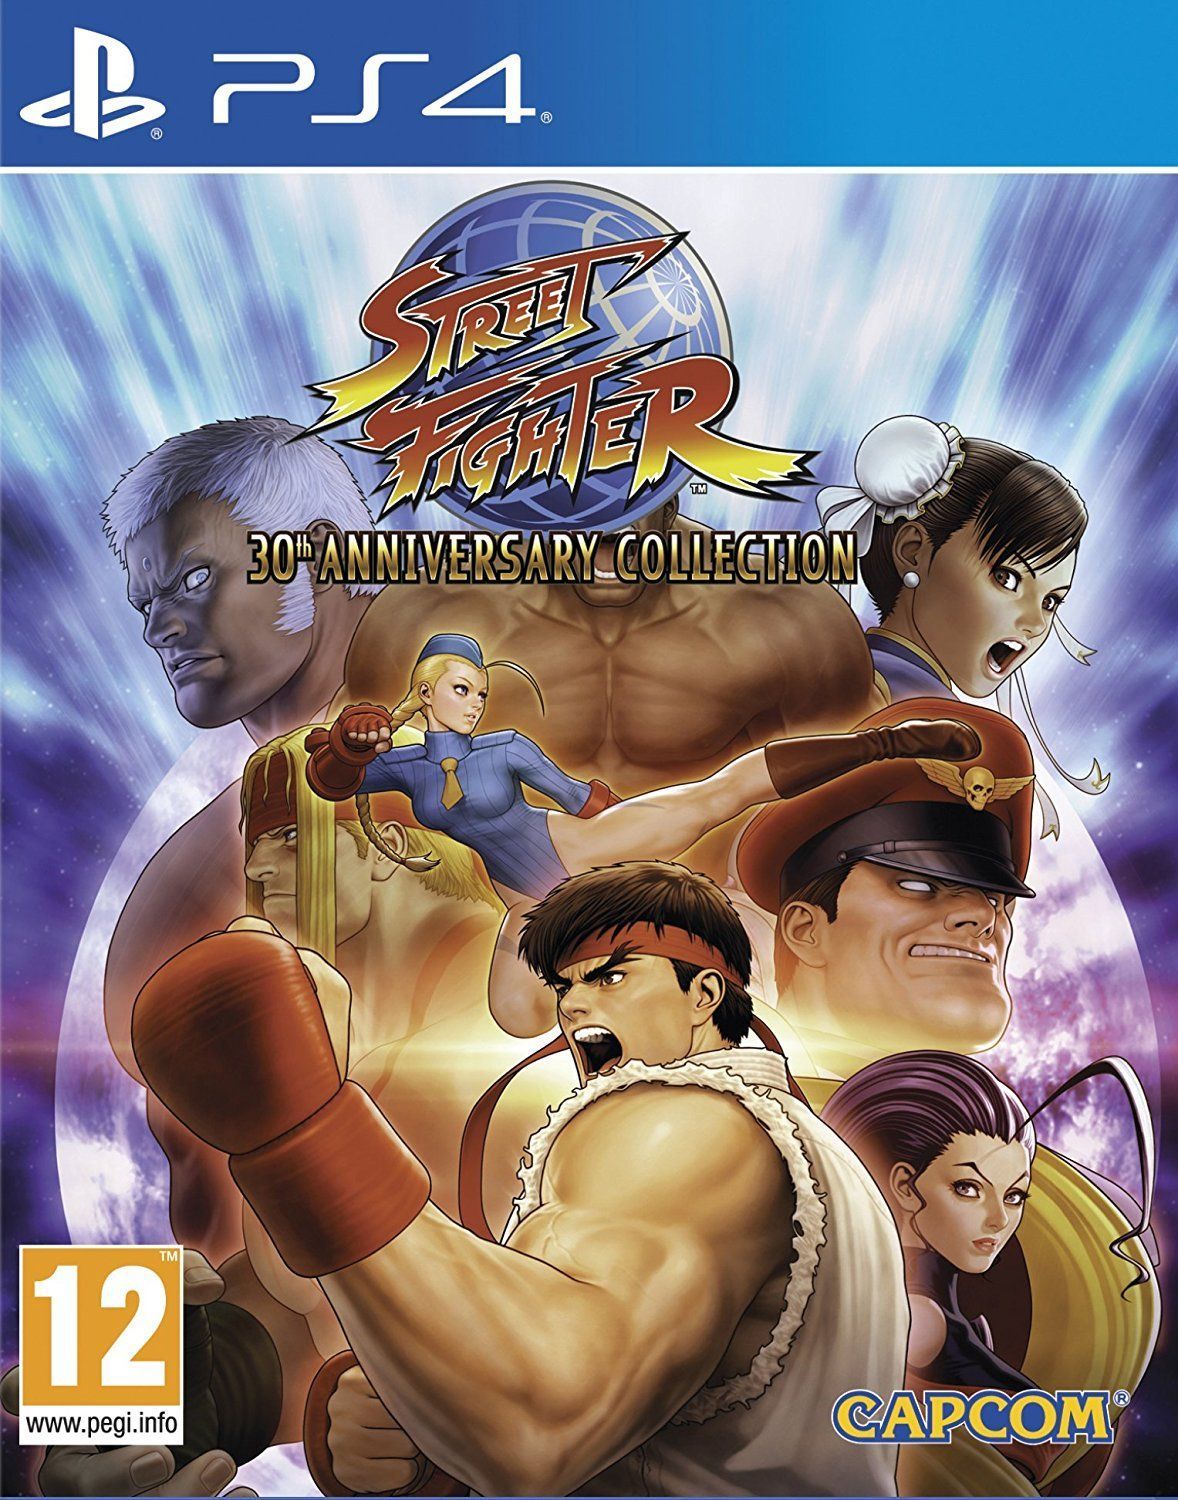 Bajo Cena Suelto Street Fighter 30th Anniversary Collection - Videojuego (PS4, Switch, Xbox  One y PC) - Vandal